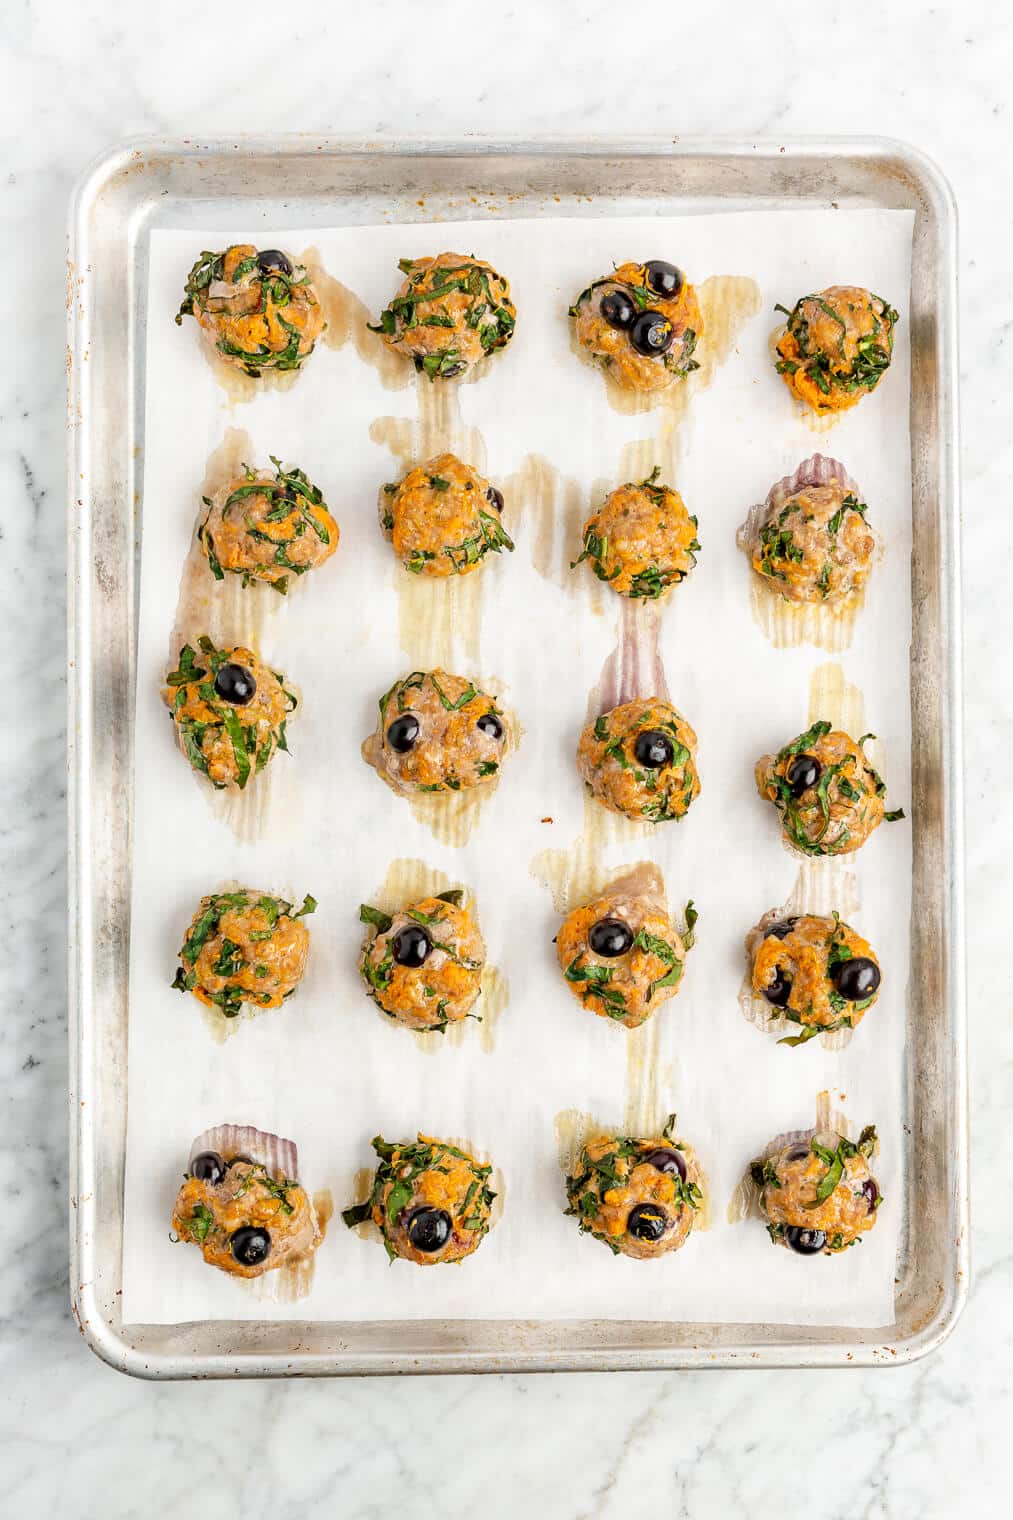 Five rows of four cooked blueberry breakfast meatballs on a parchment lined baking sheet on a grey and white marble surface.